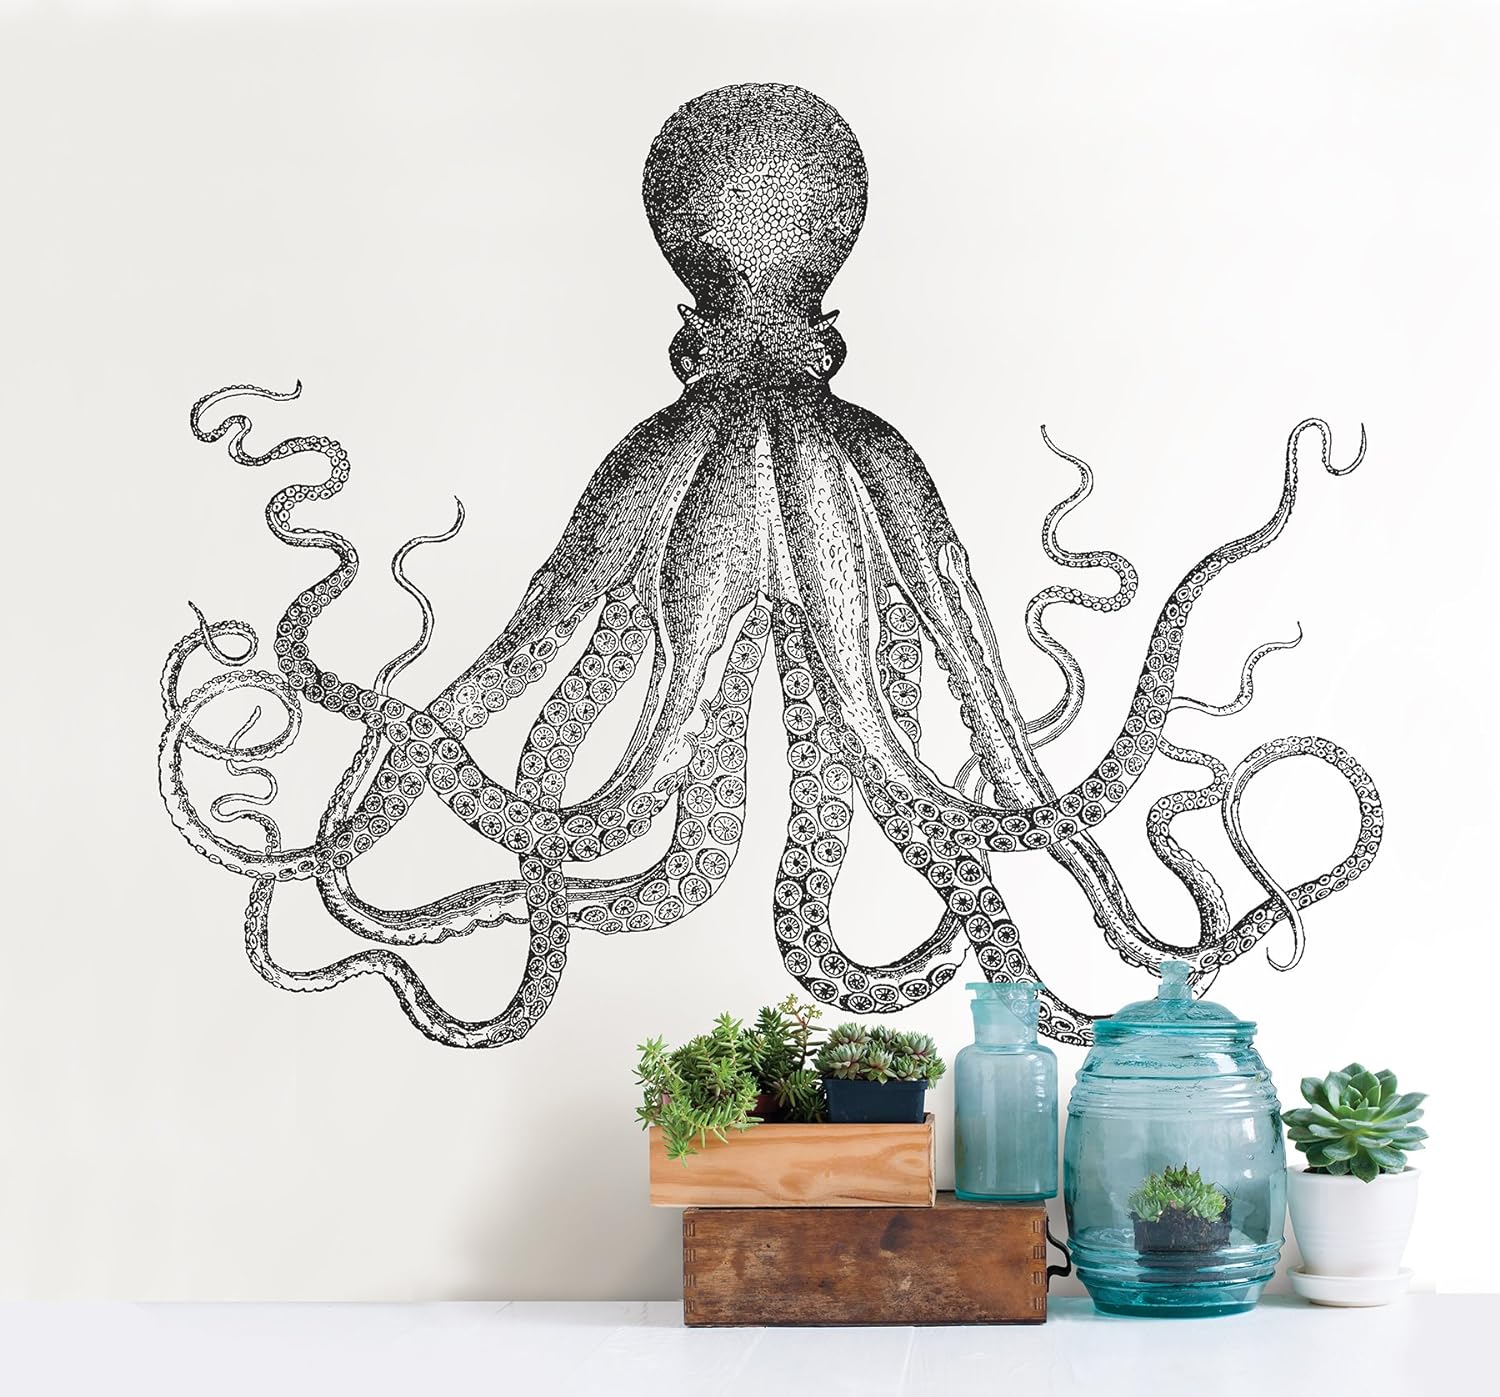 Create drama in the kids bathroom with this Octopus decal